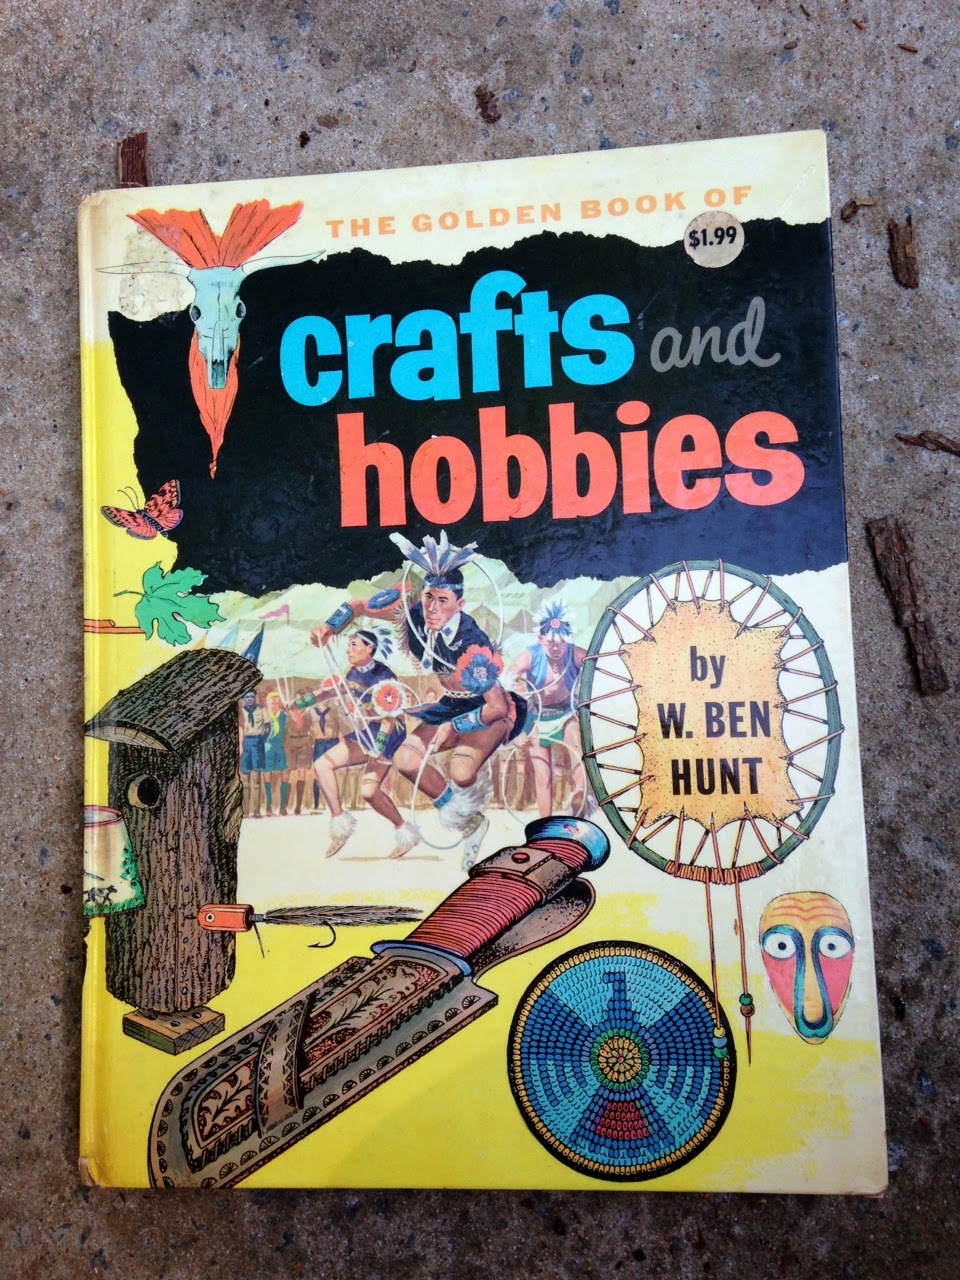 Sewing School: Vintage Craft Book: The Golden Book of Crafts and Hobbies